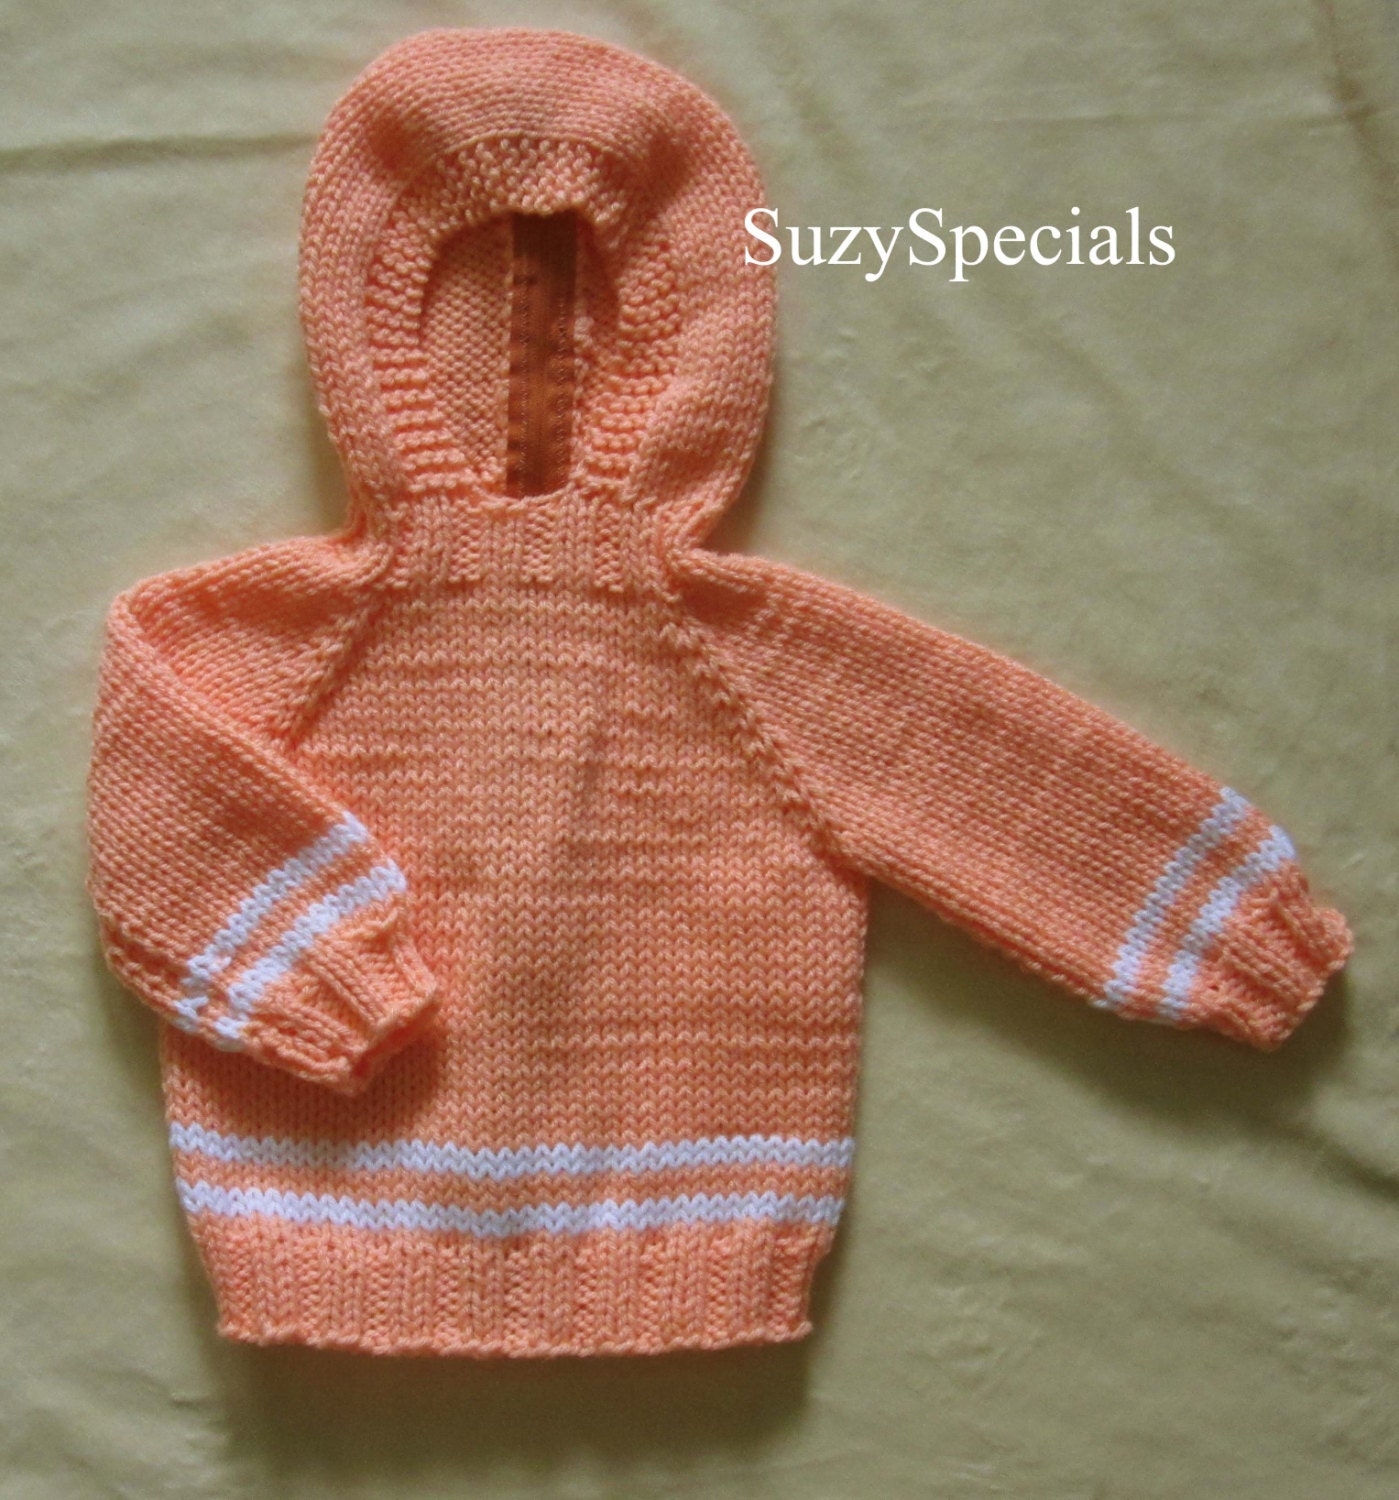 Hooded Knitted Baby Sweater with Back Zipper in Peach Color